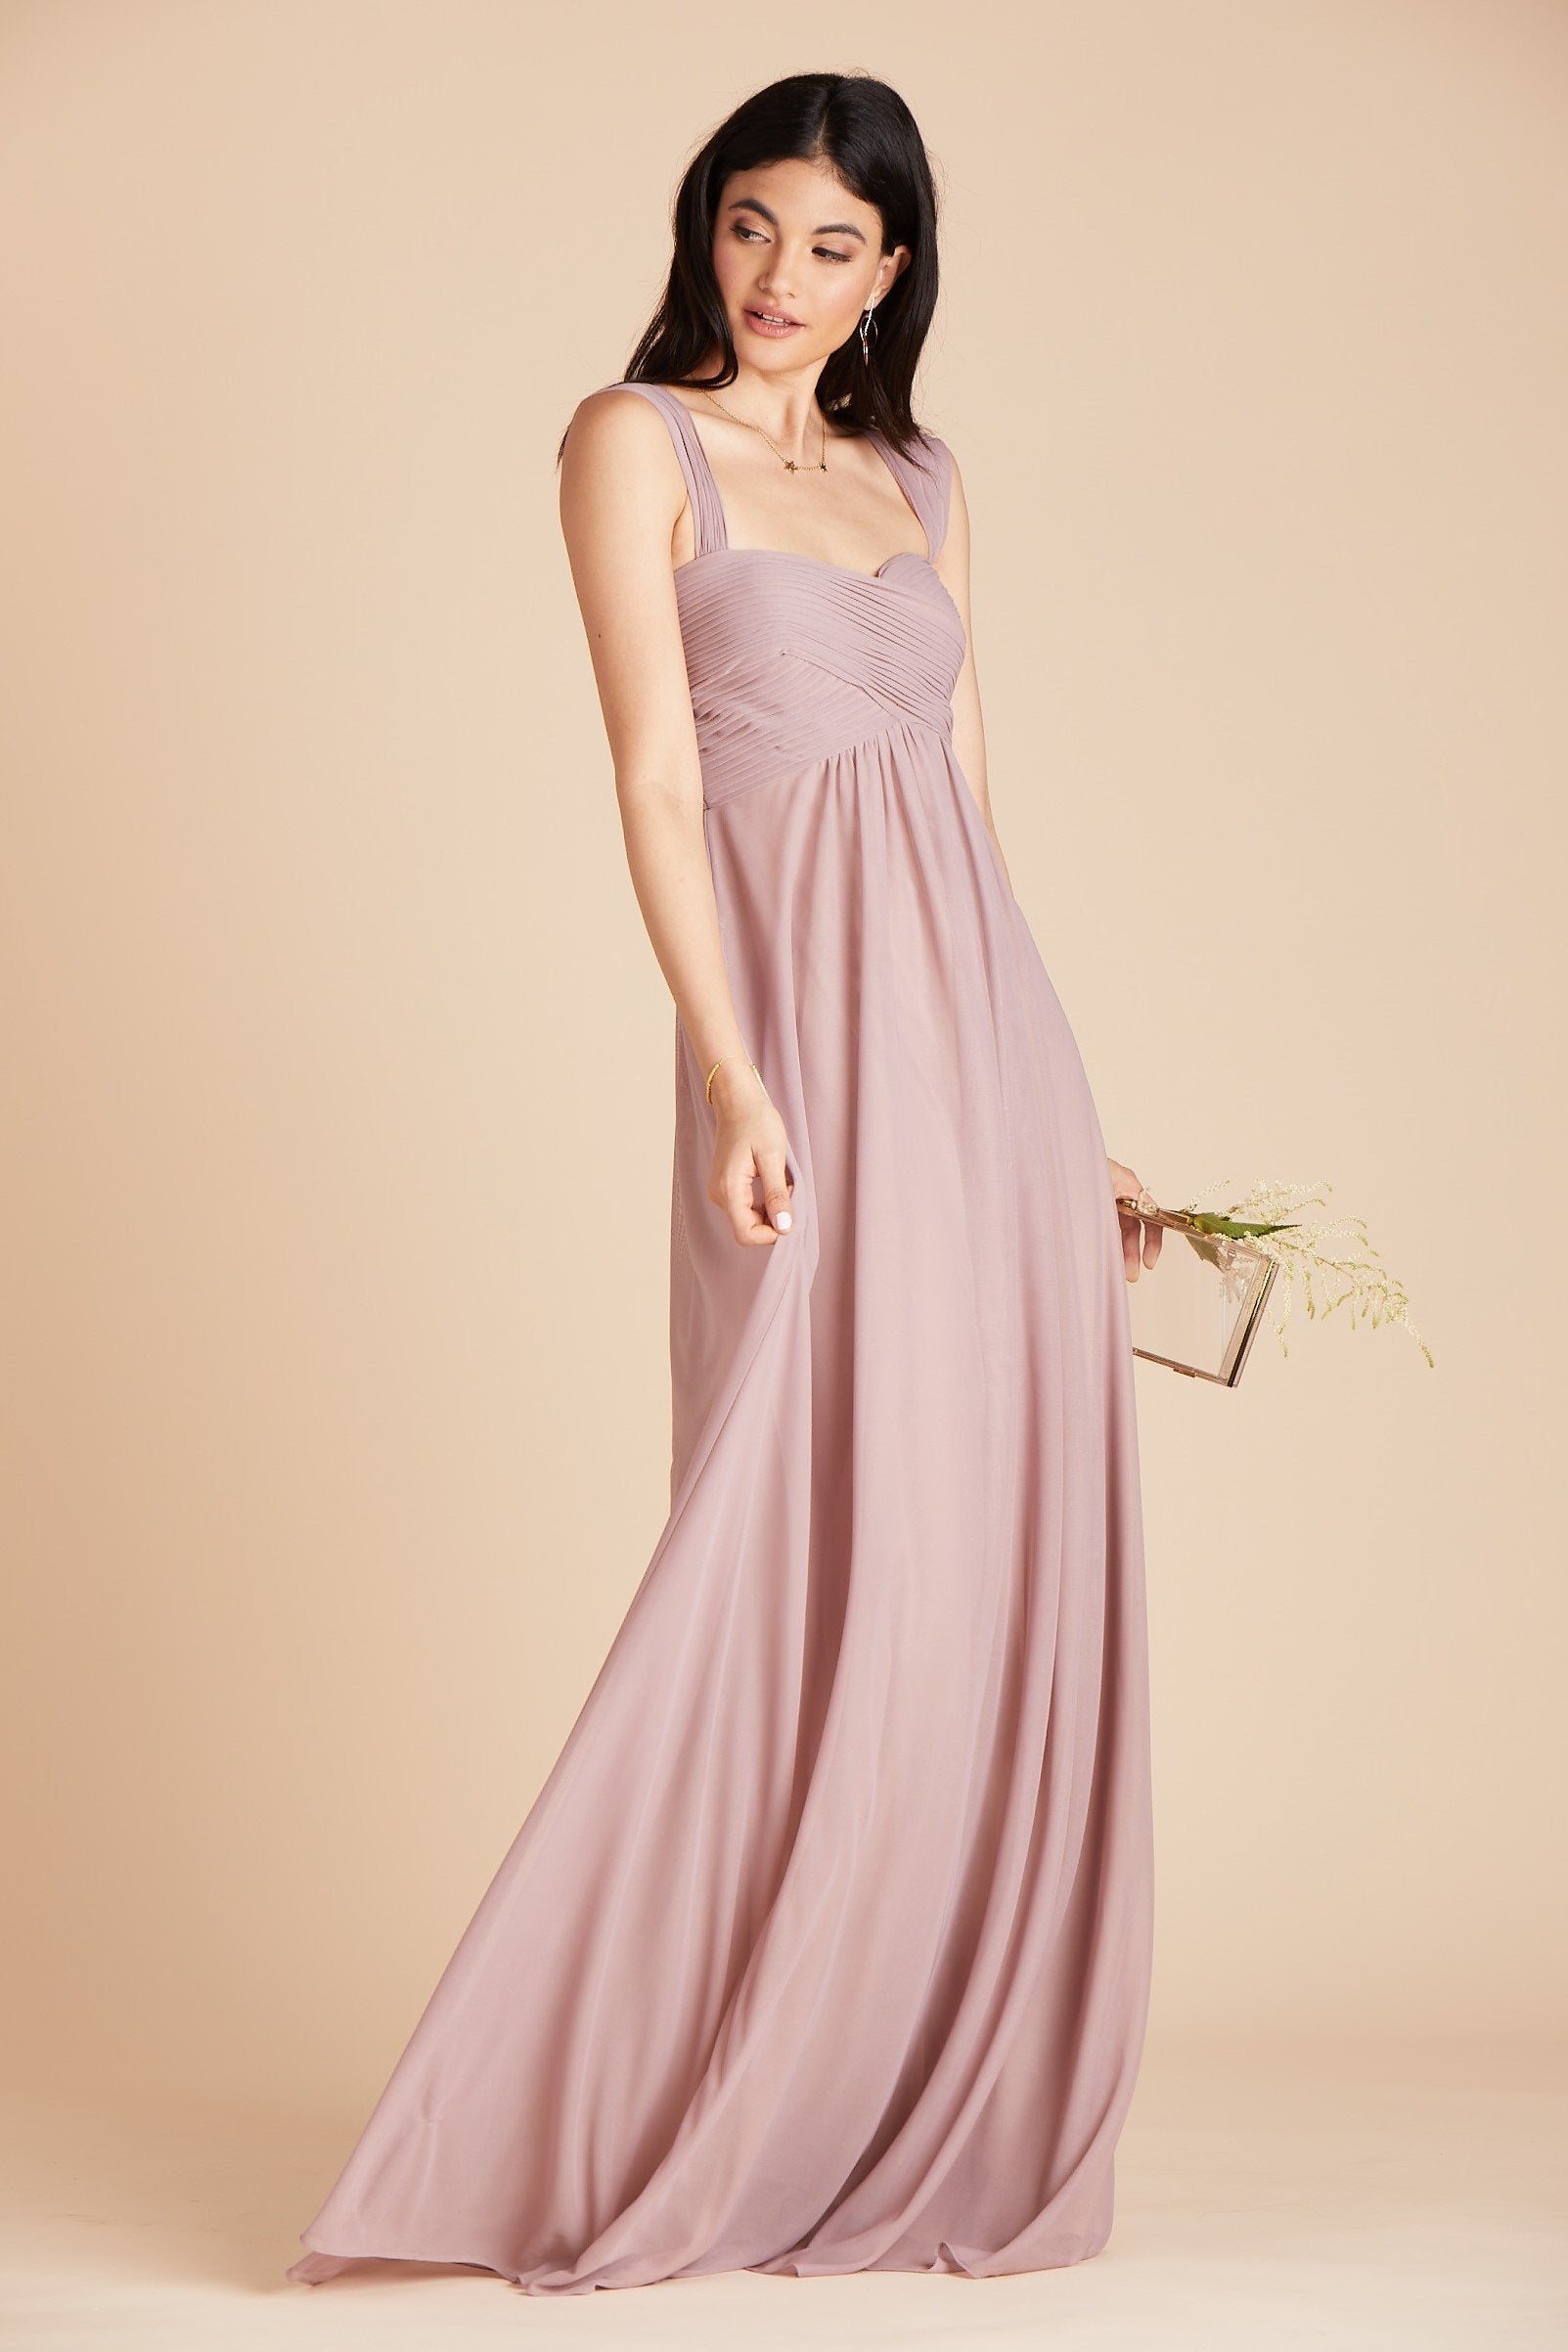 Maria convertible bridesmaids dress in mauve chiffon by Birdy Grey, side view